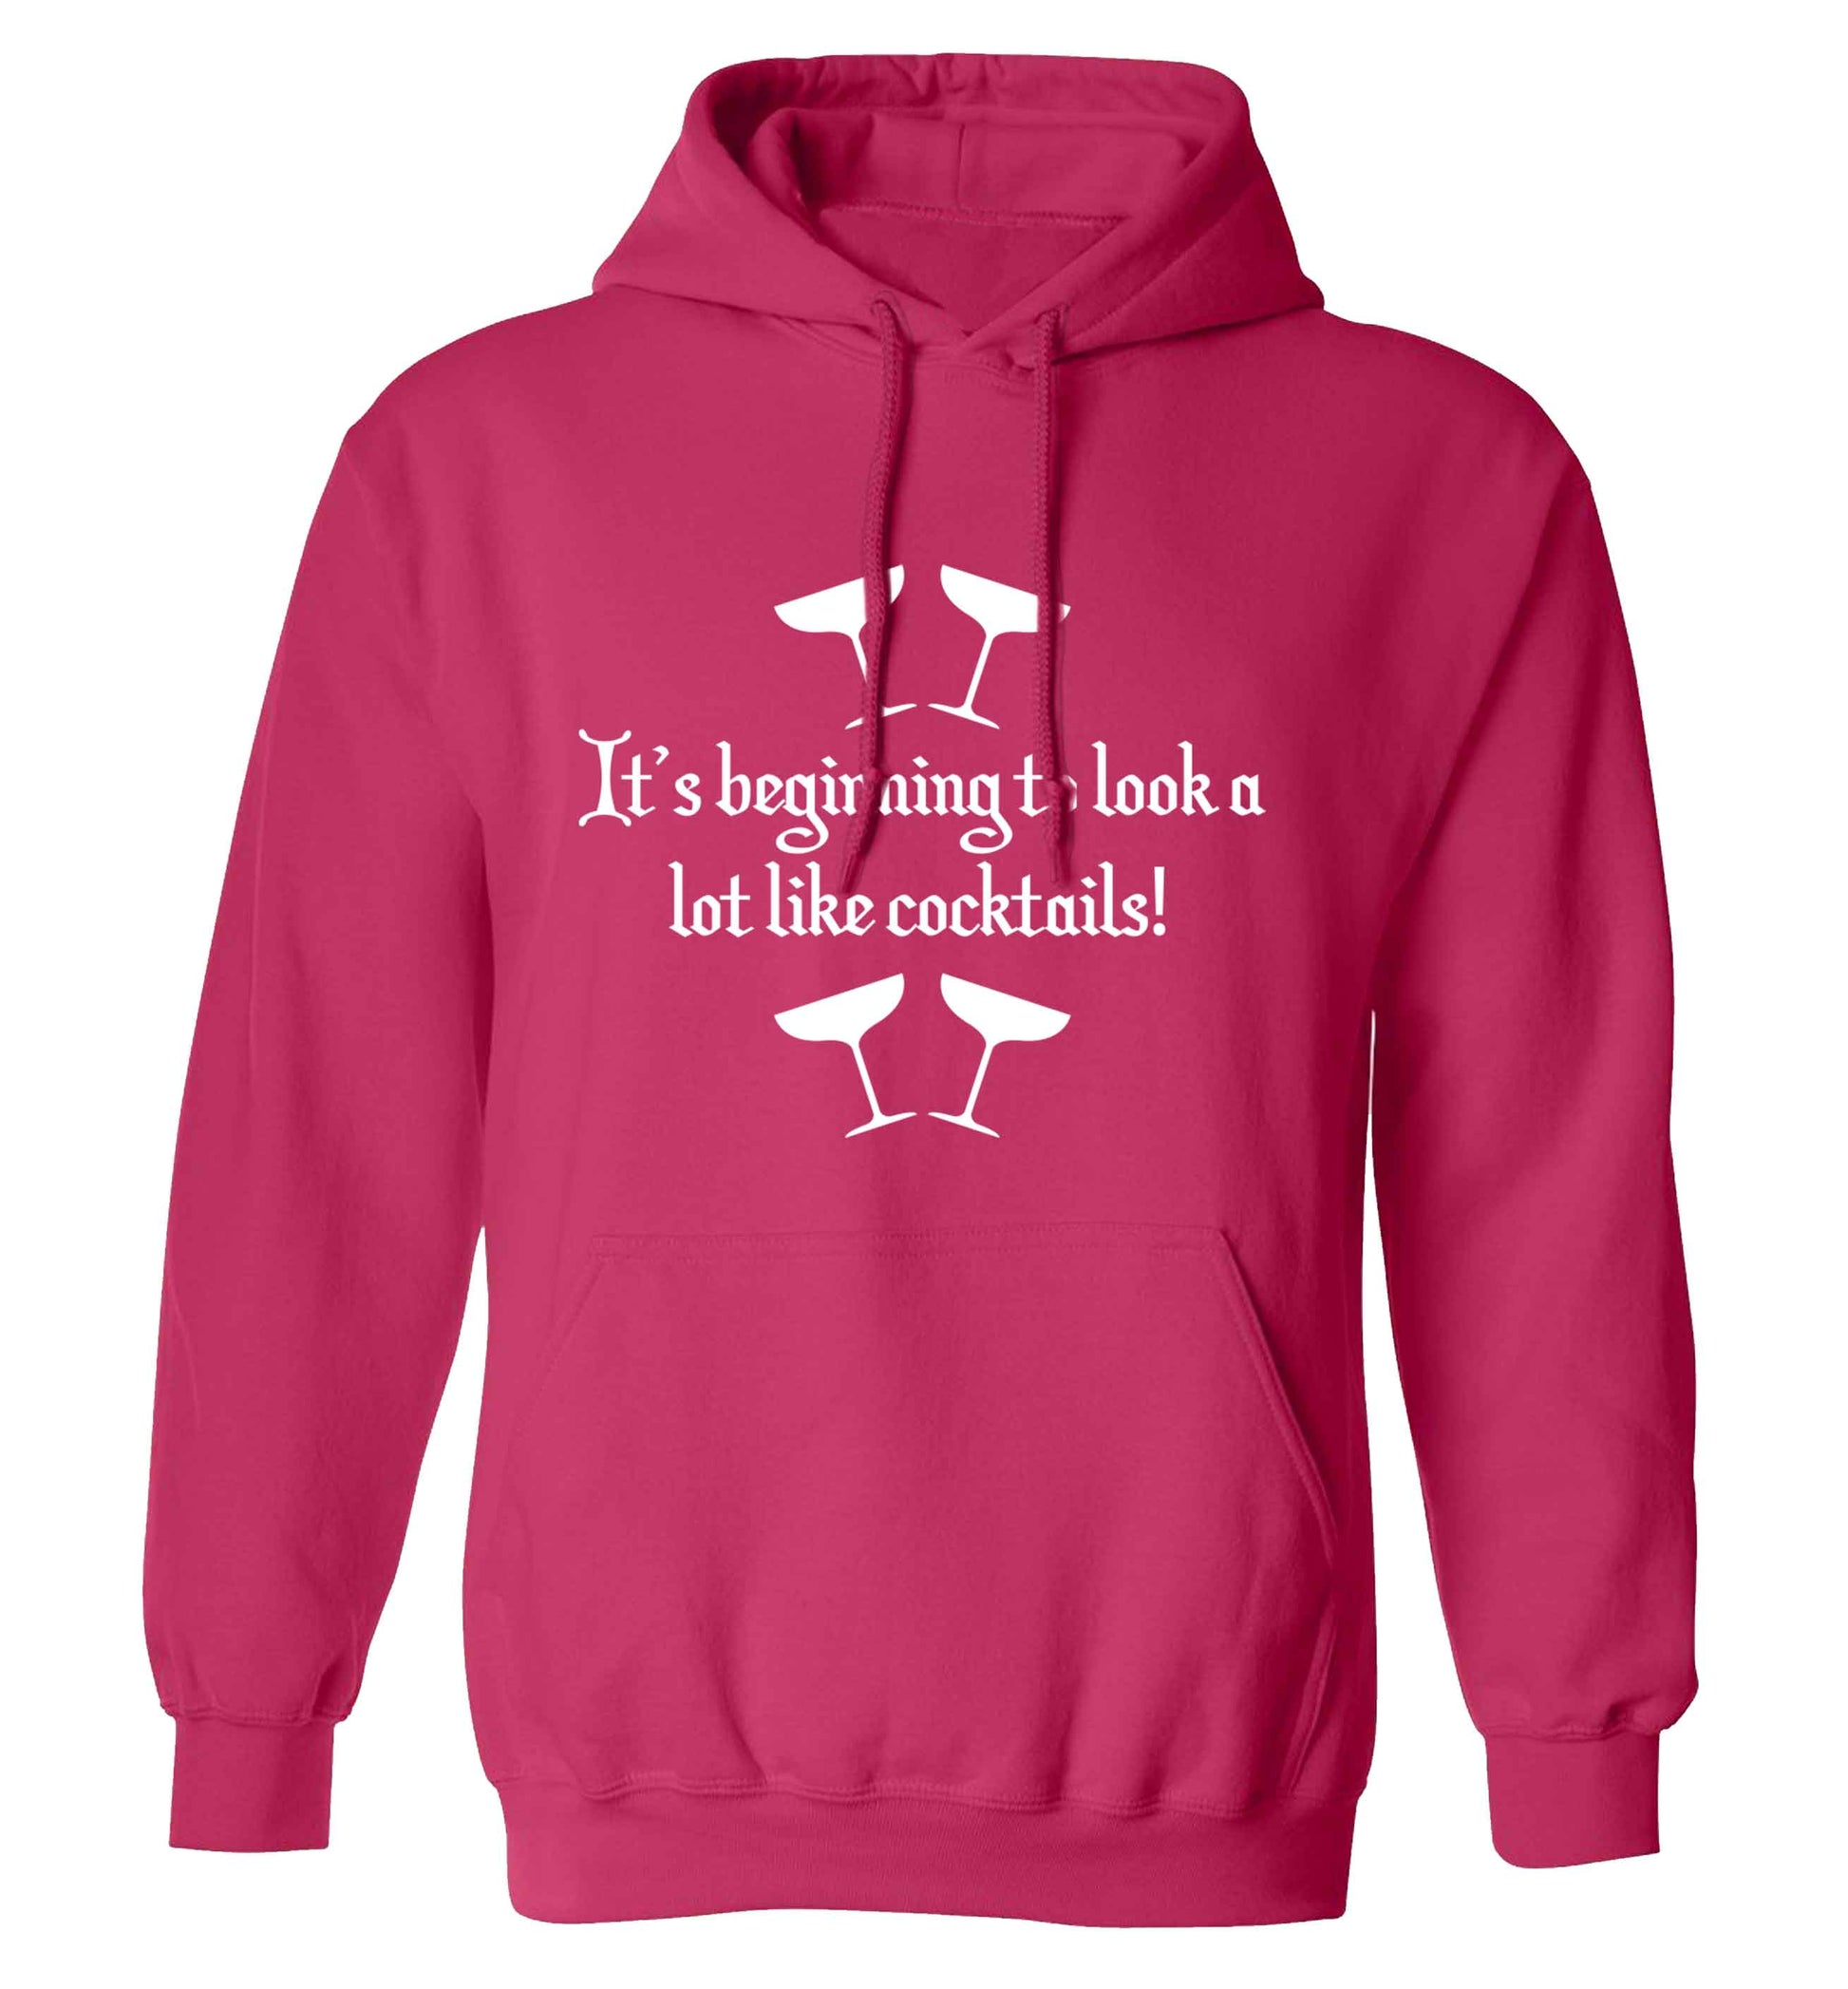 It's beginning to look a lot like cocktails adults unisex pink hoodie 2XL